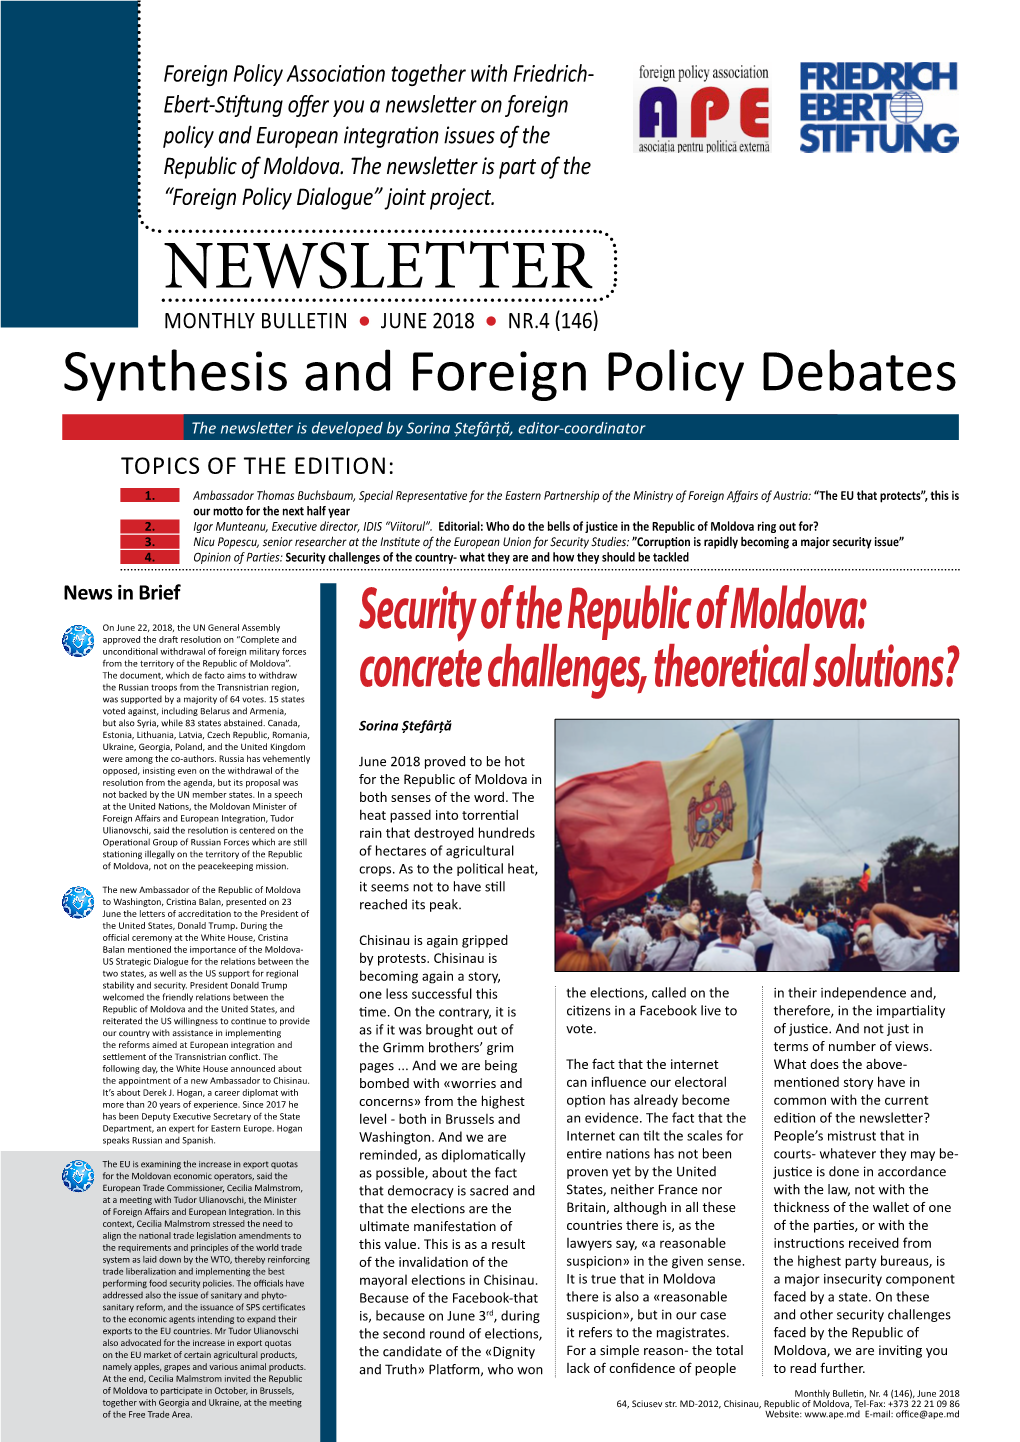 Newsletter on Foreign Policy and European Integration Issues of the Republic of Moldova